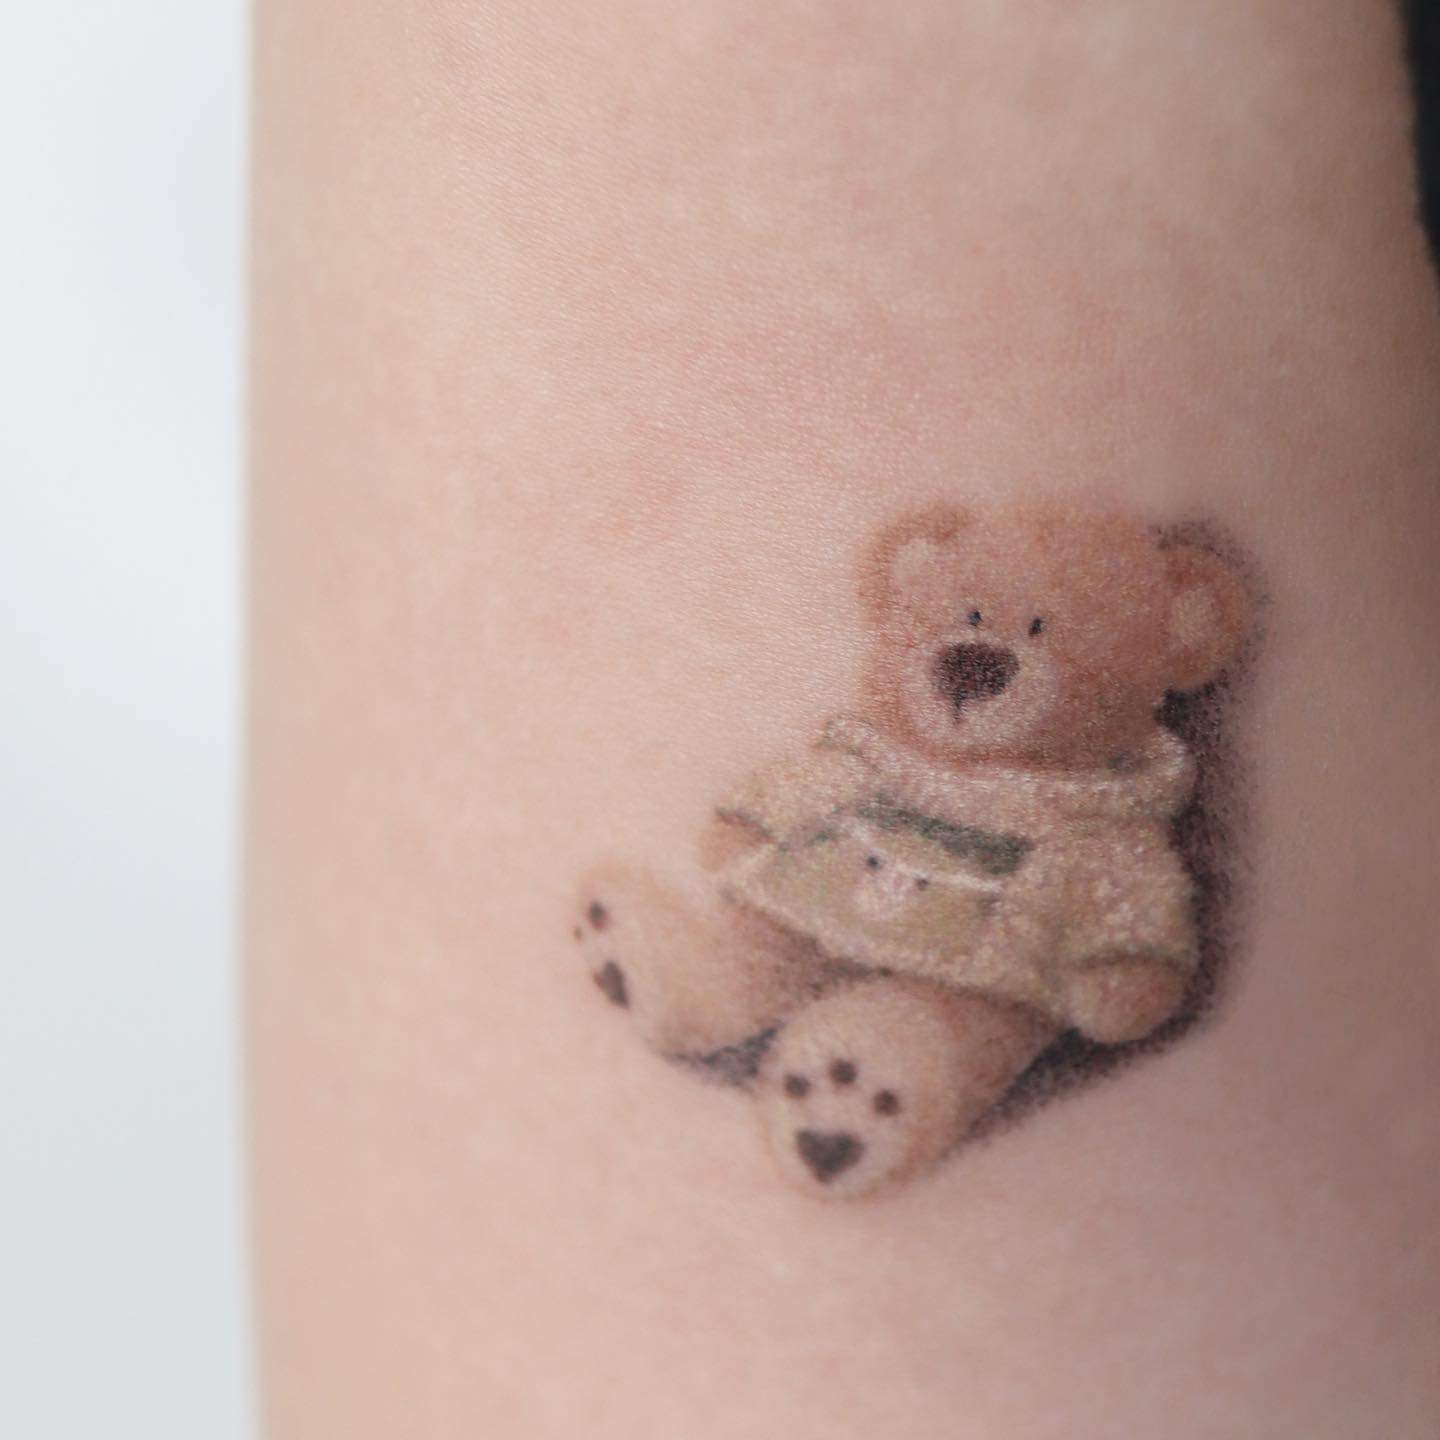 43 Cute And Creative Teddy Bear Tattoos  Inked and Faded